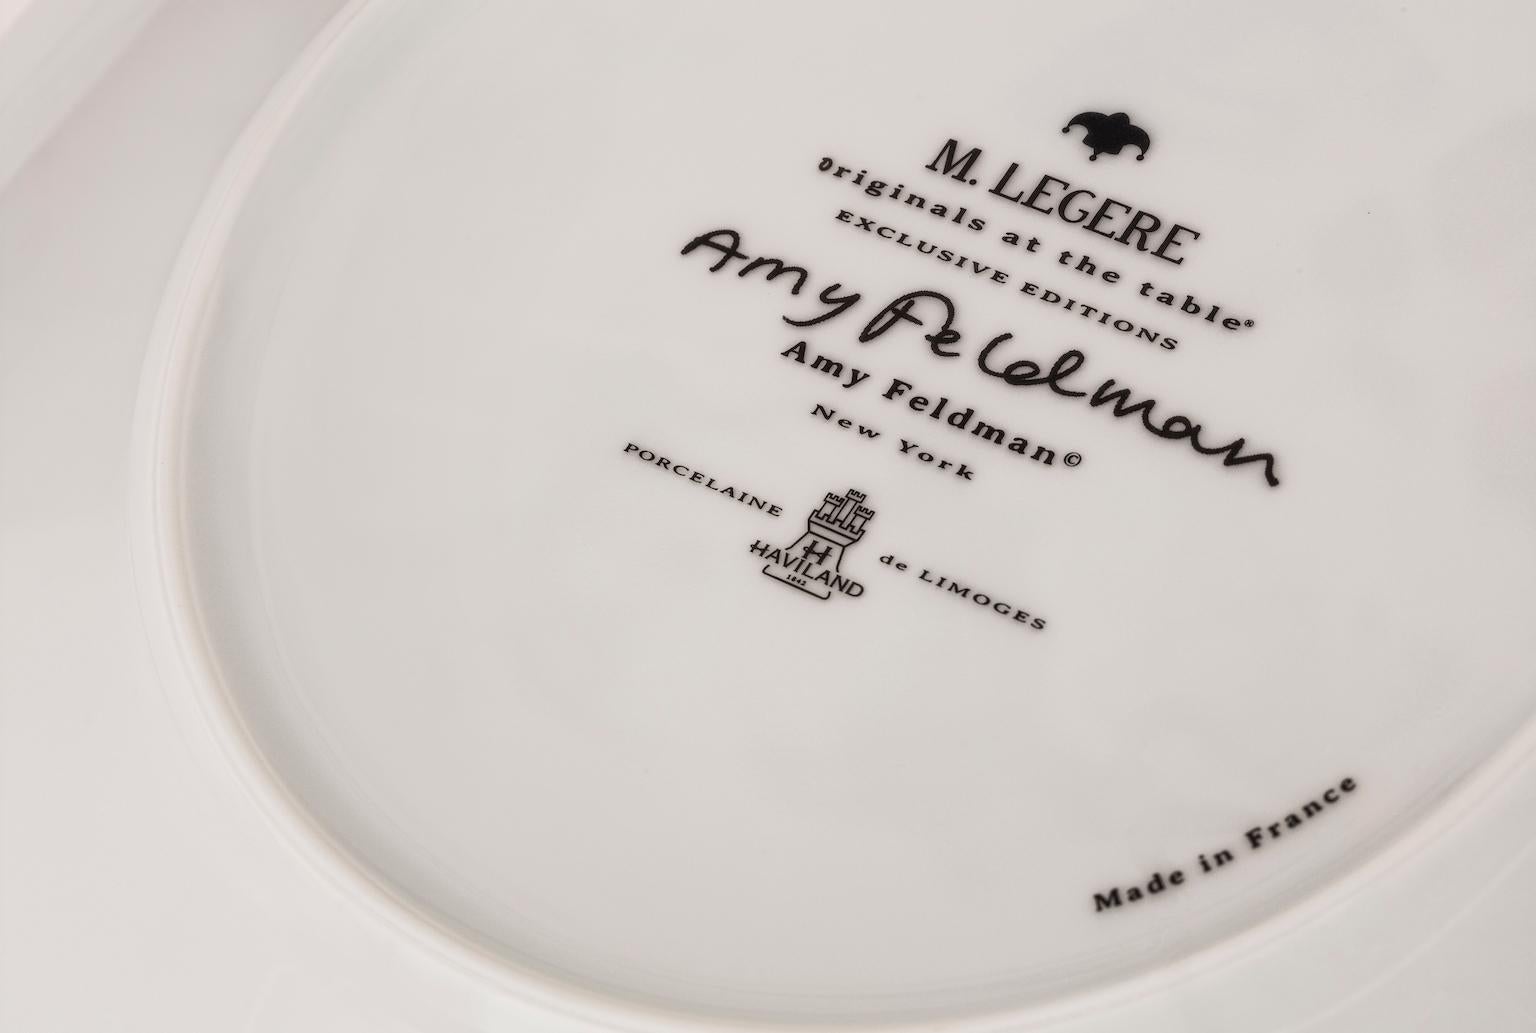 This inky black and silvery gray Limoges porcelain appetizer plate is rendered from artwork created by Brooklyn NYC female abstract Artist Amy Feldman exclusively for M.Legere and is dishwater safe. M.Legere chose Haviland, Limoges France's leading